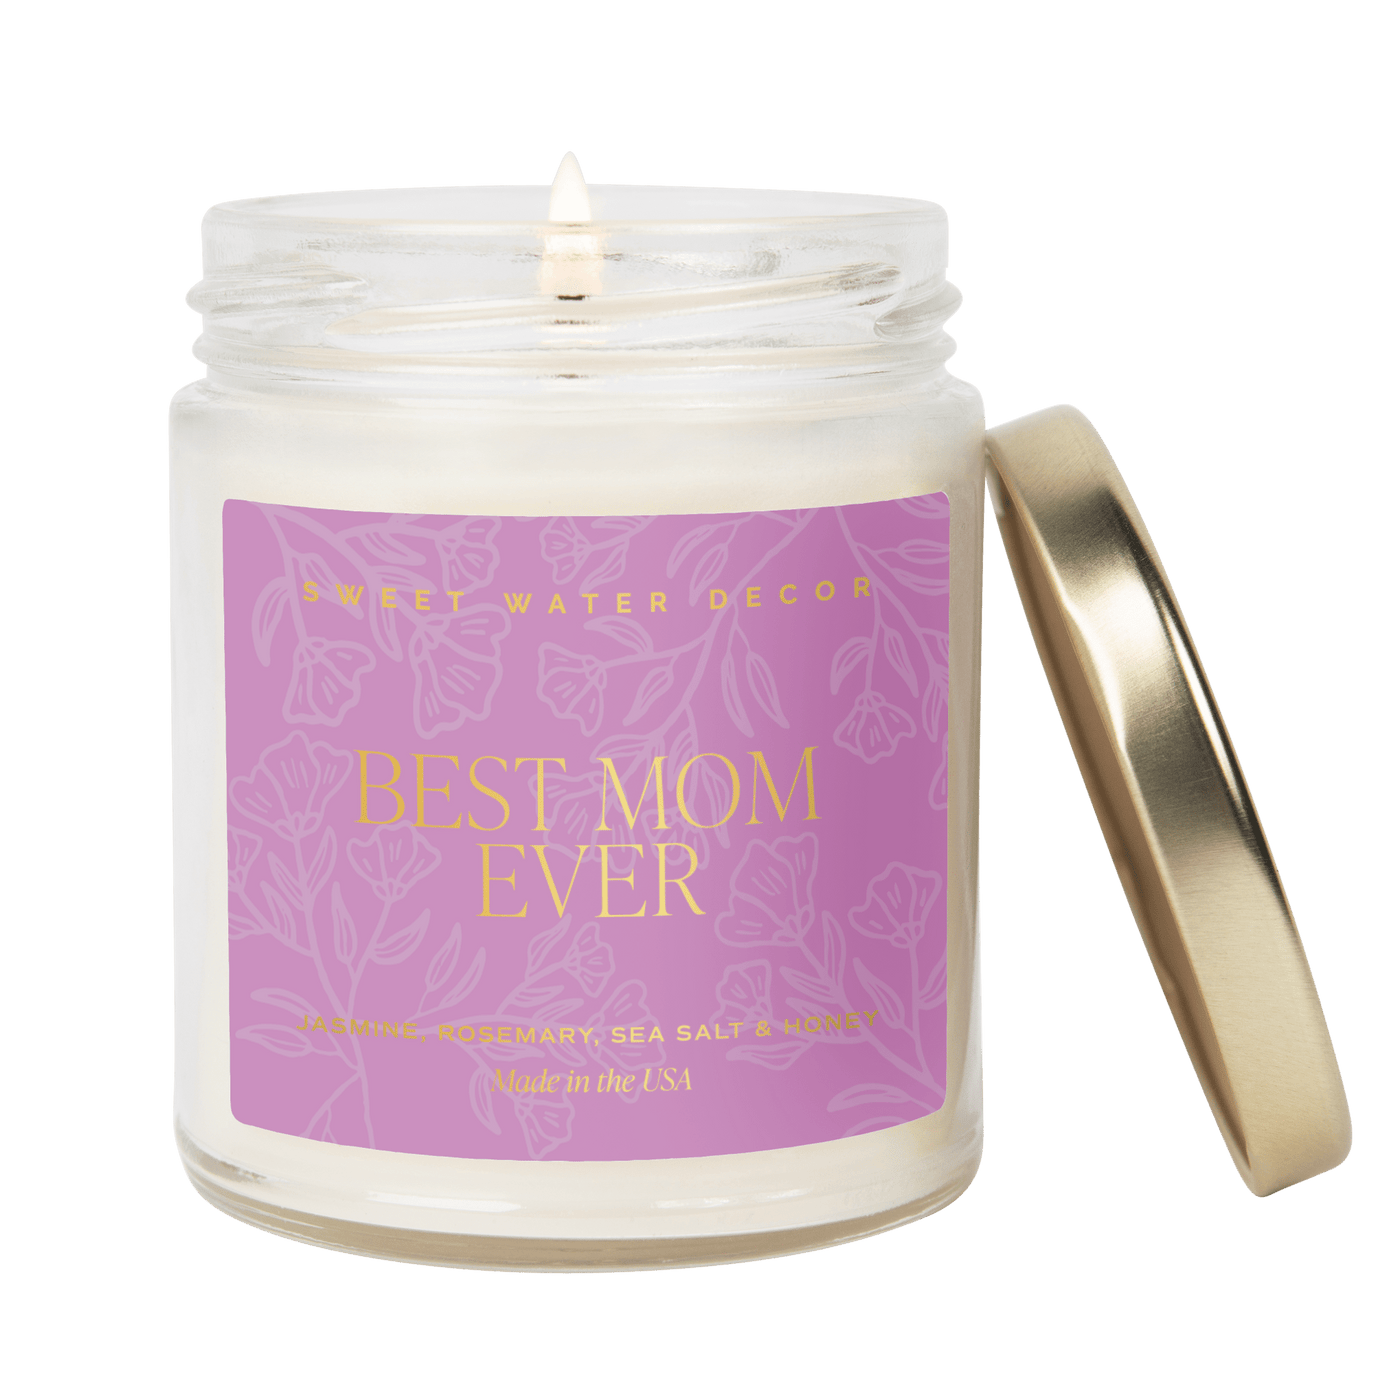 Best Mom Ever Soy Candle - Clear Jar - 9 oz (Wildflowers and Salt) - Sweet Water Decor - Candles